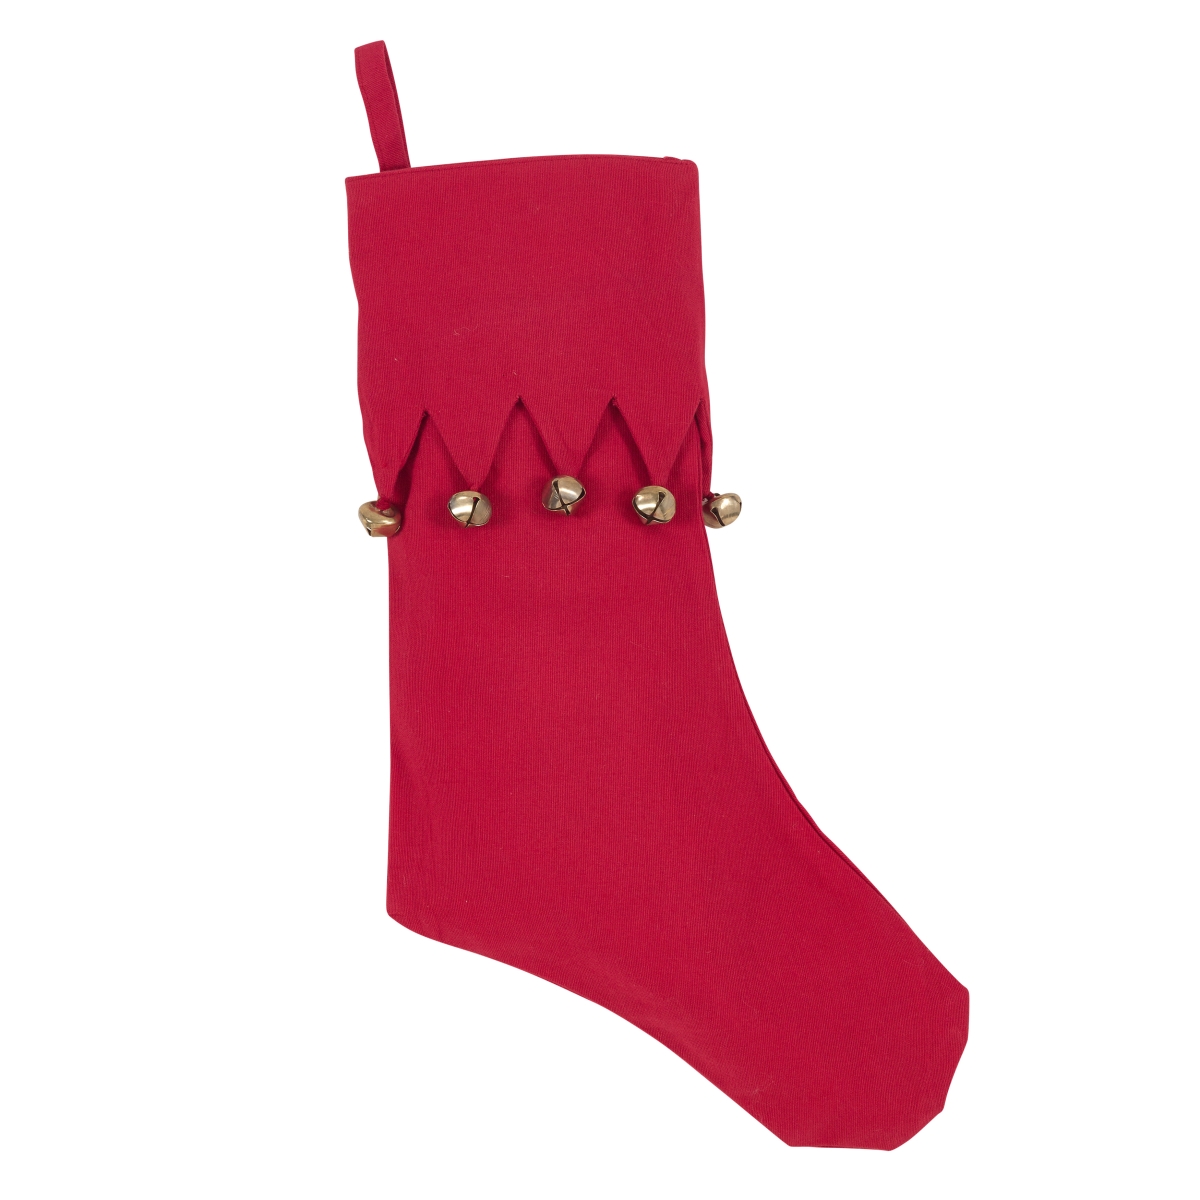 9020.r1319b 13 X 19 In. Rectangle Jingle Bell Accent Cotton Christmas Stocking, Red